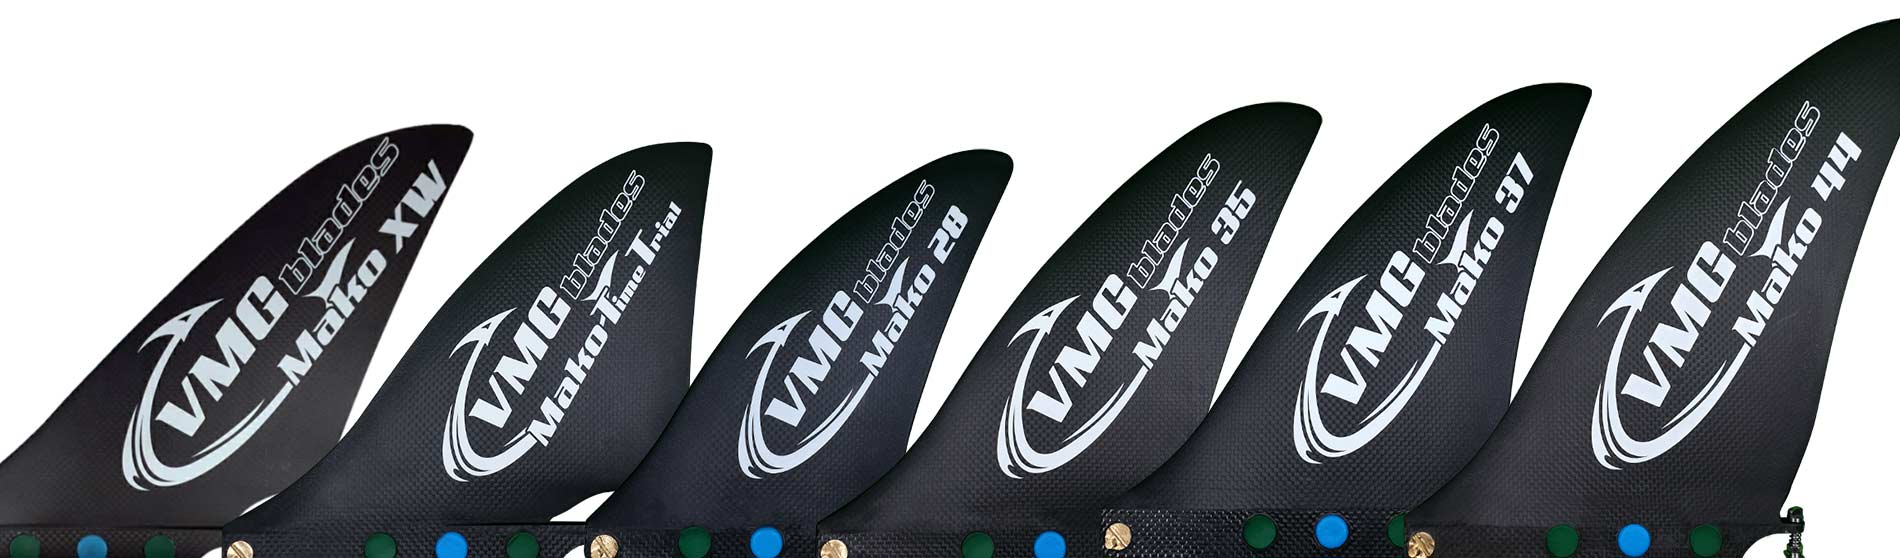 SUP Racing Fins are now Tool-less - Introducting the VMG Fin Lock 